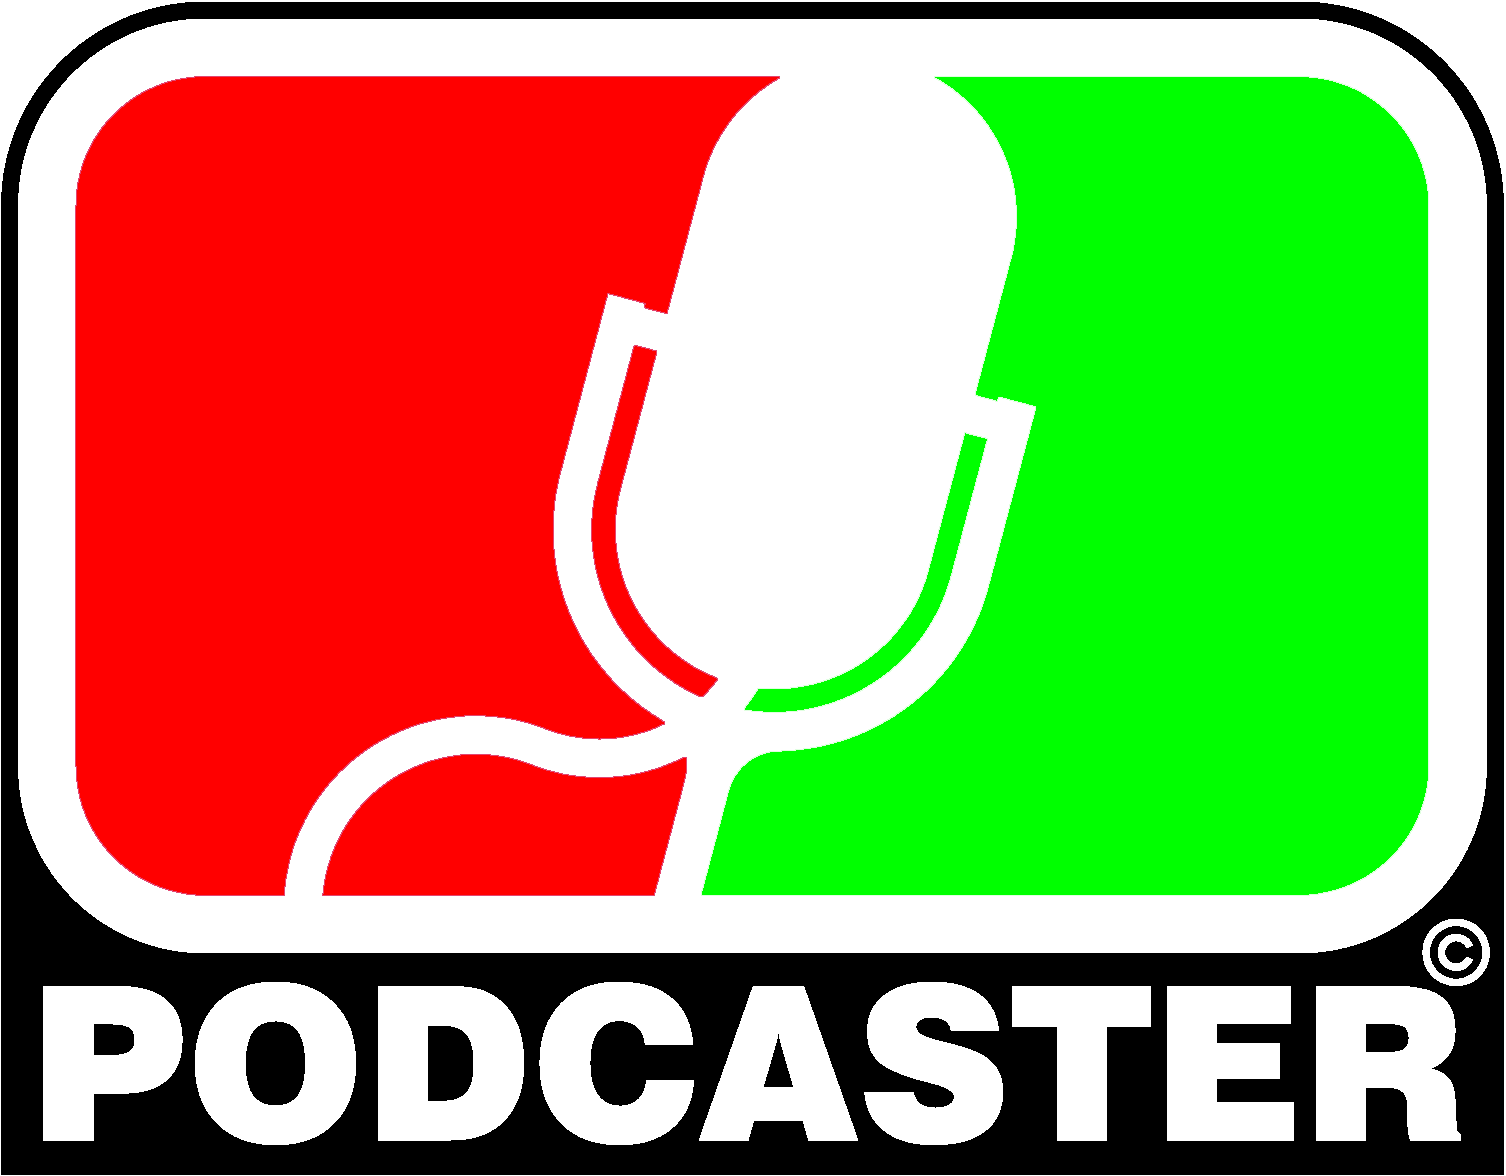 Red and Green Logo - Podcaster Badges